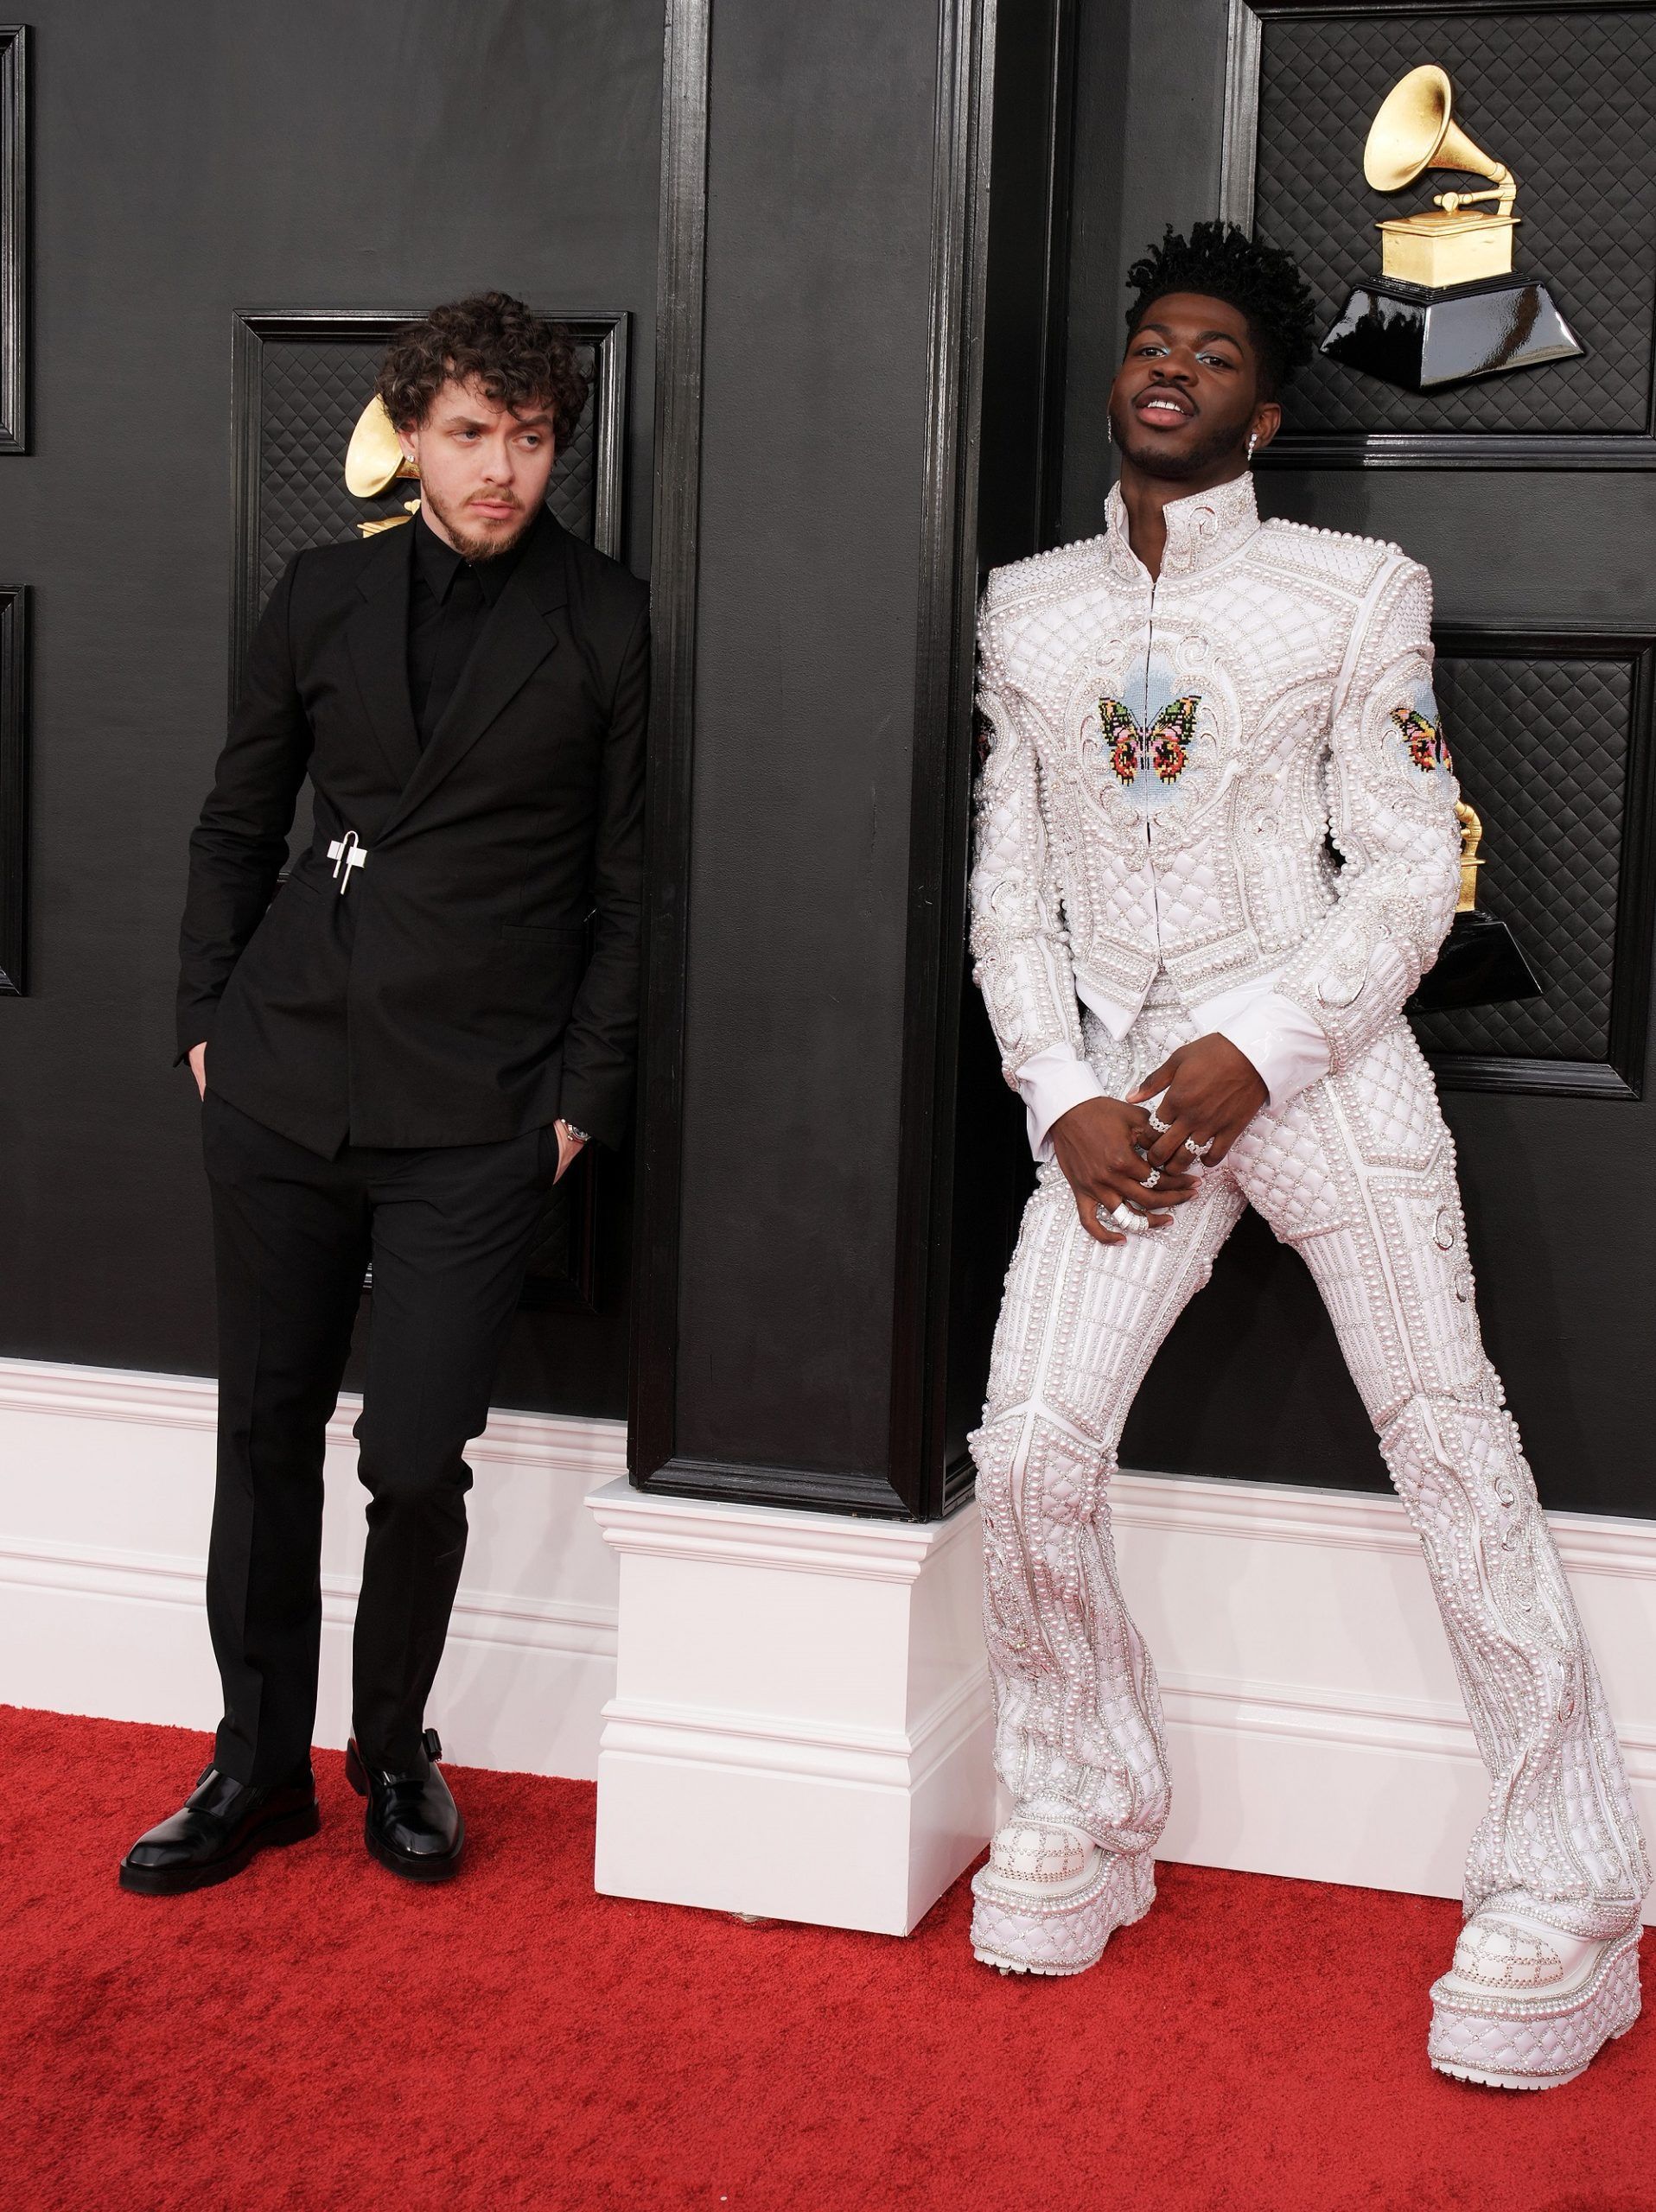 Grammys 2022 red carpet: Jack Harlow and Lil Nas X